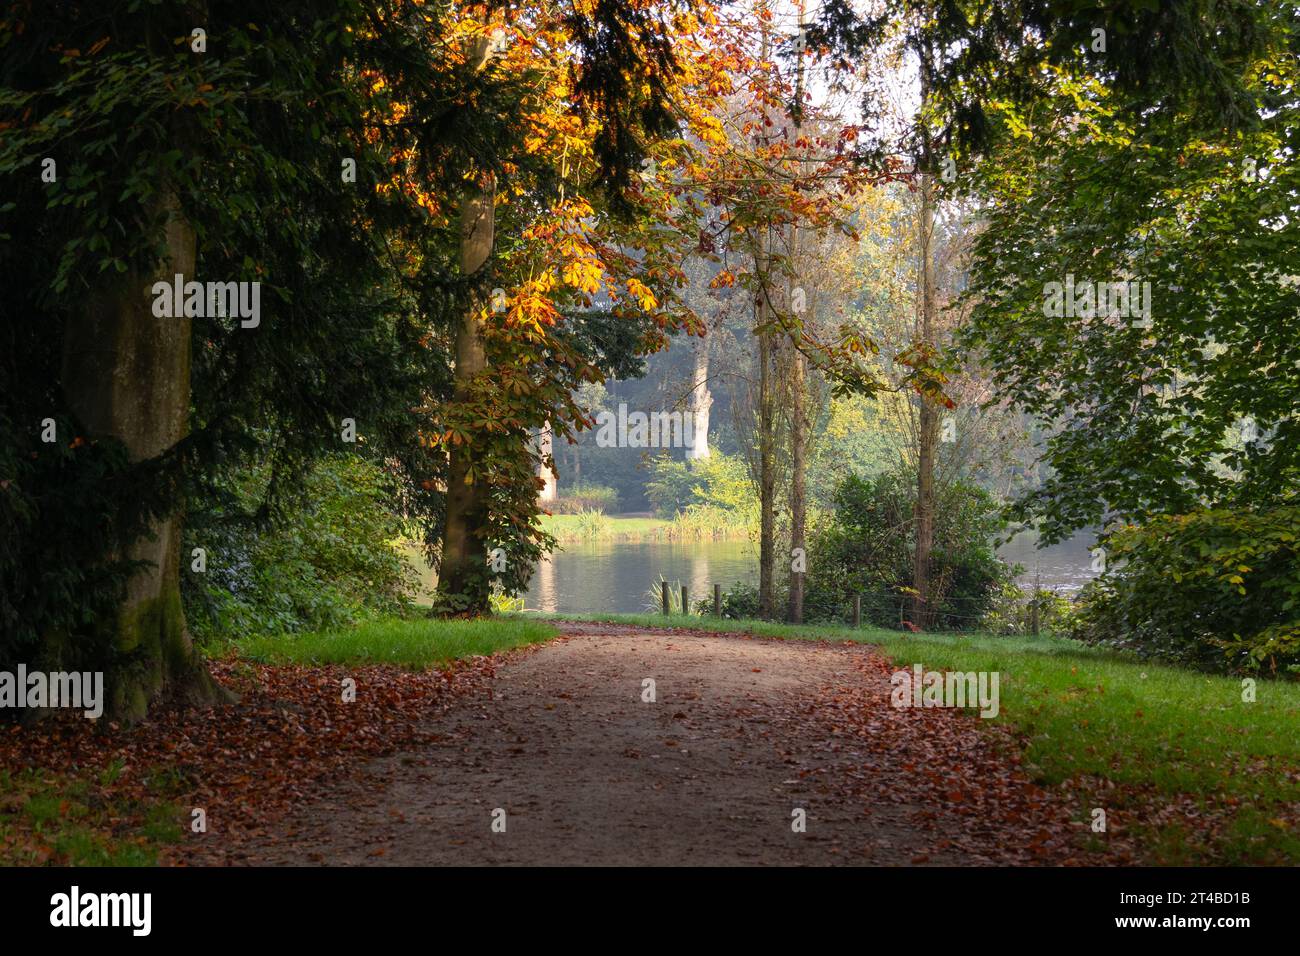 Walking path with autumn atmosphere in the park outdoors Stock Photo